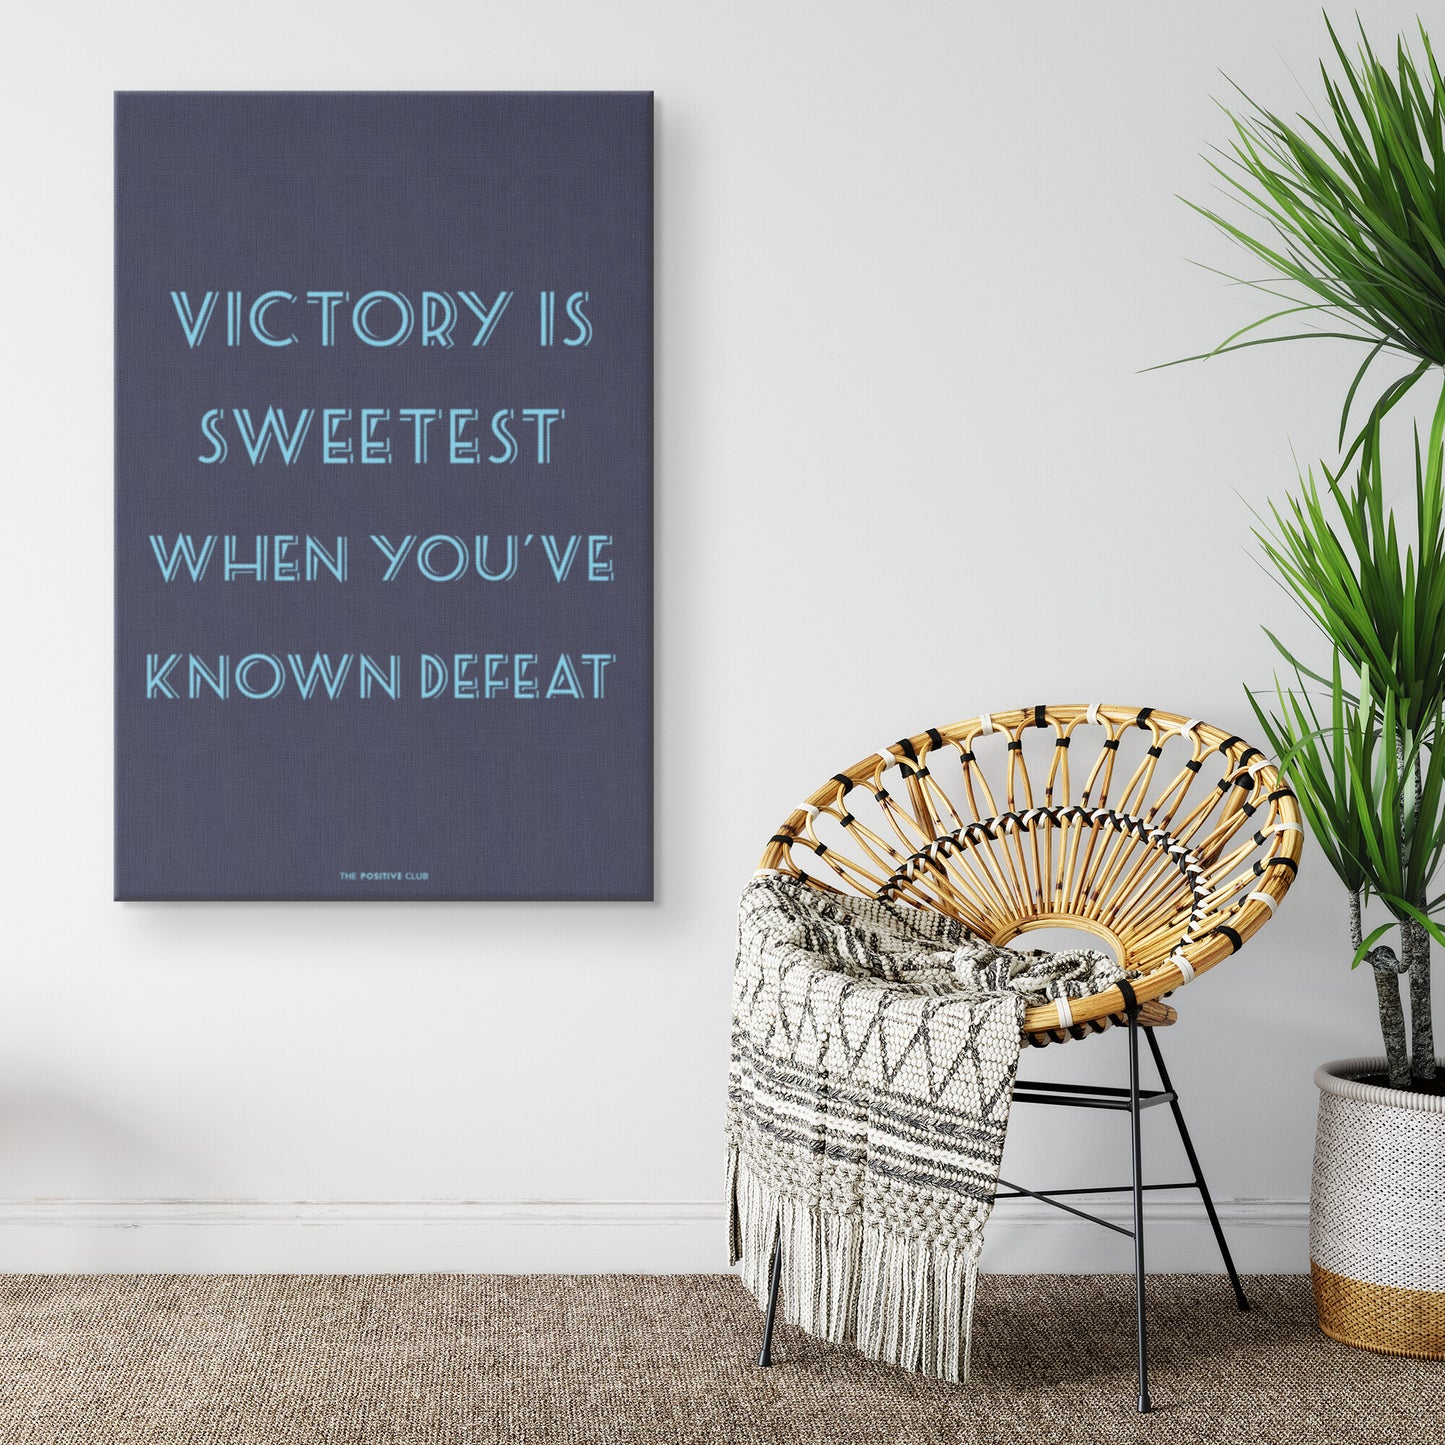 VICTORY IS SWEETEST WHEN YOU'VE KNOWN DEFEAT